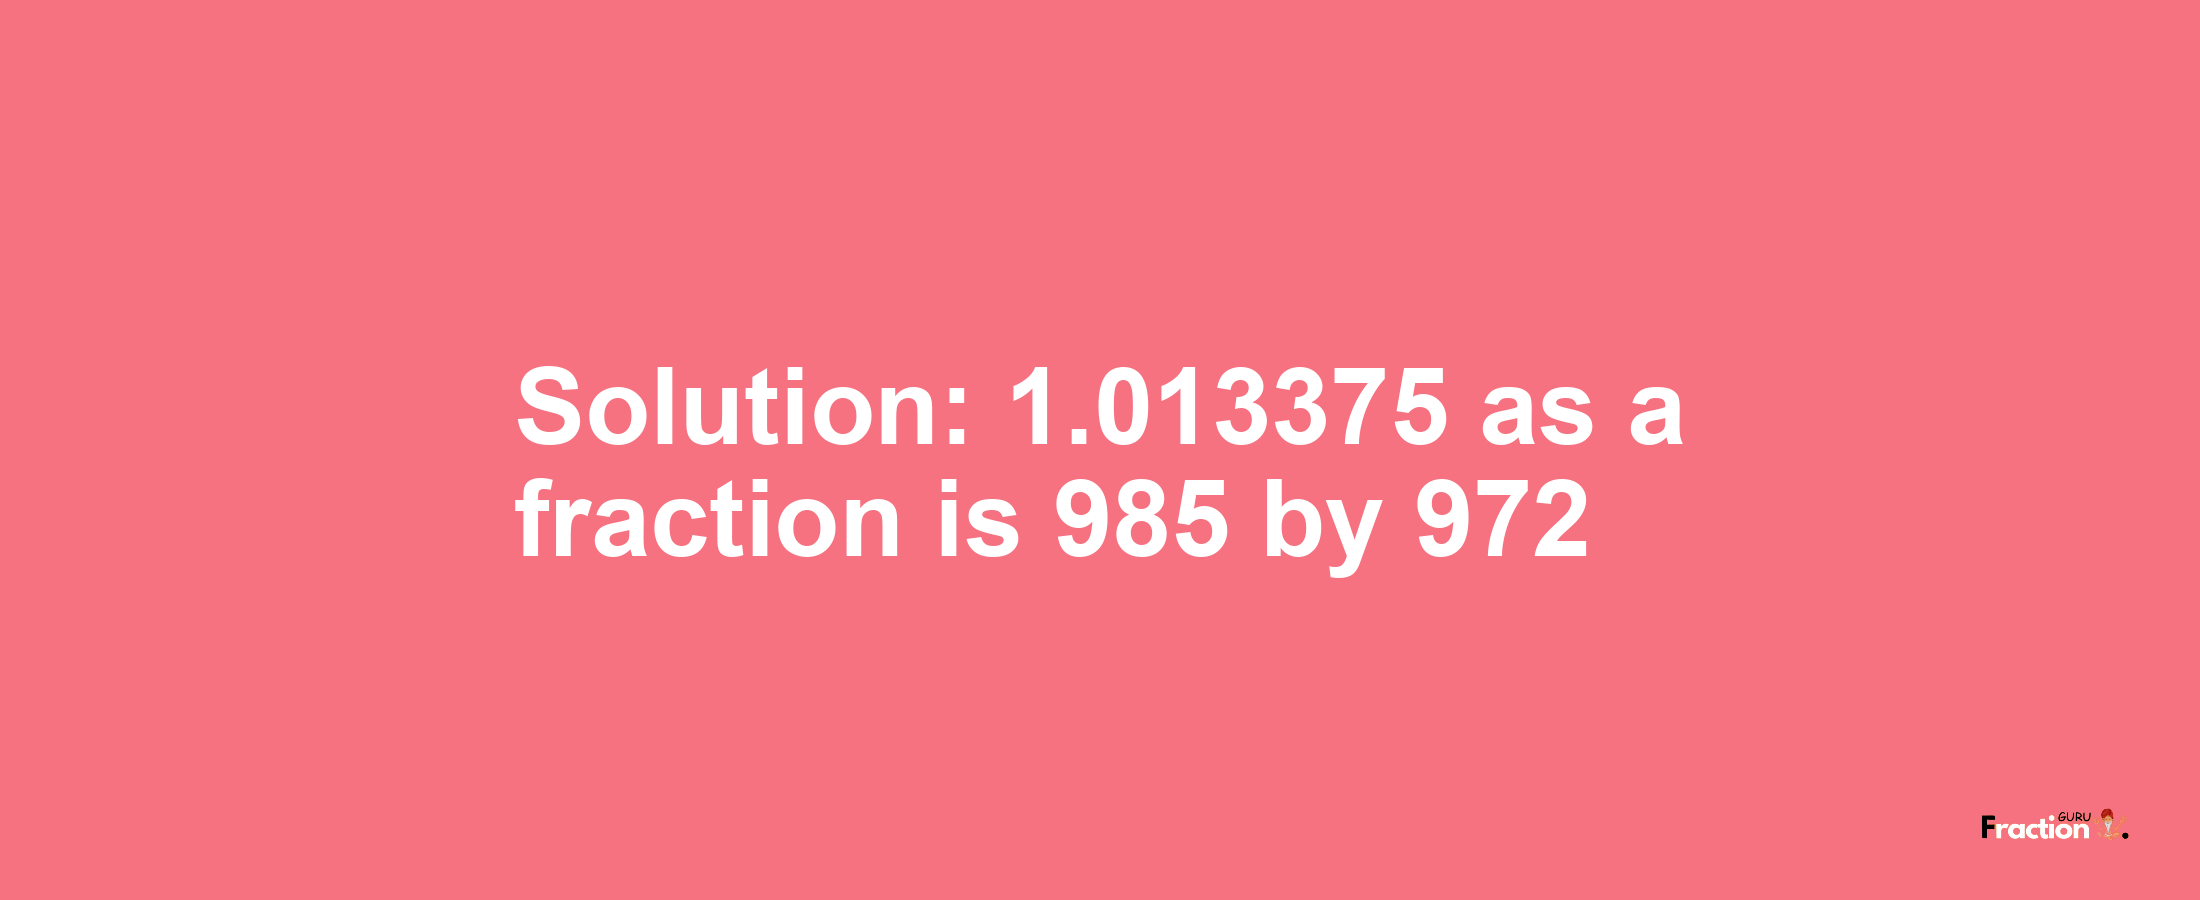 Solution:1.013375 as a fraction is 985/972